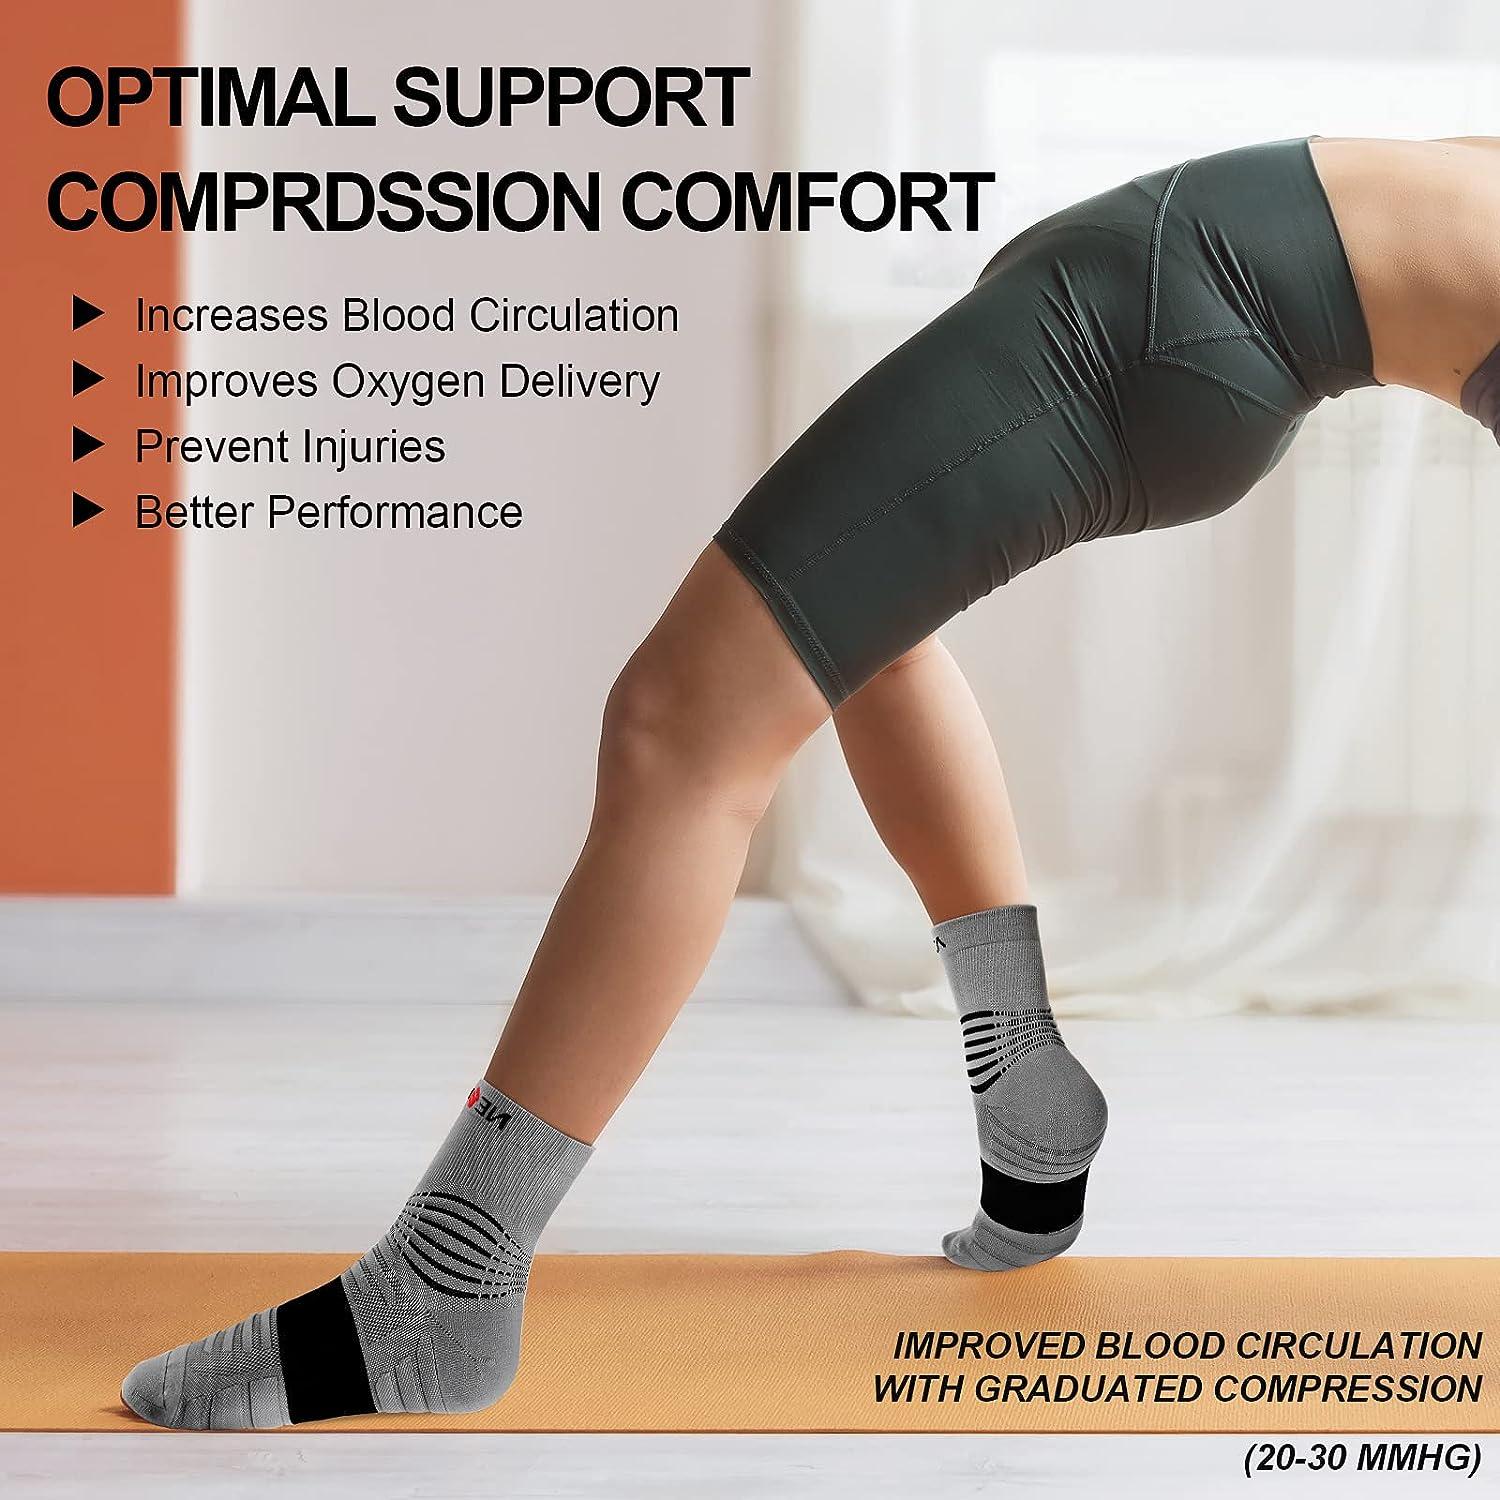 Are There Benefits of Wearing Compression Socks While Sleeping?. Nike SG